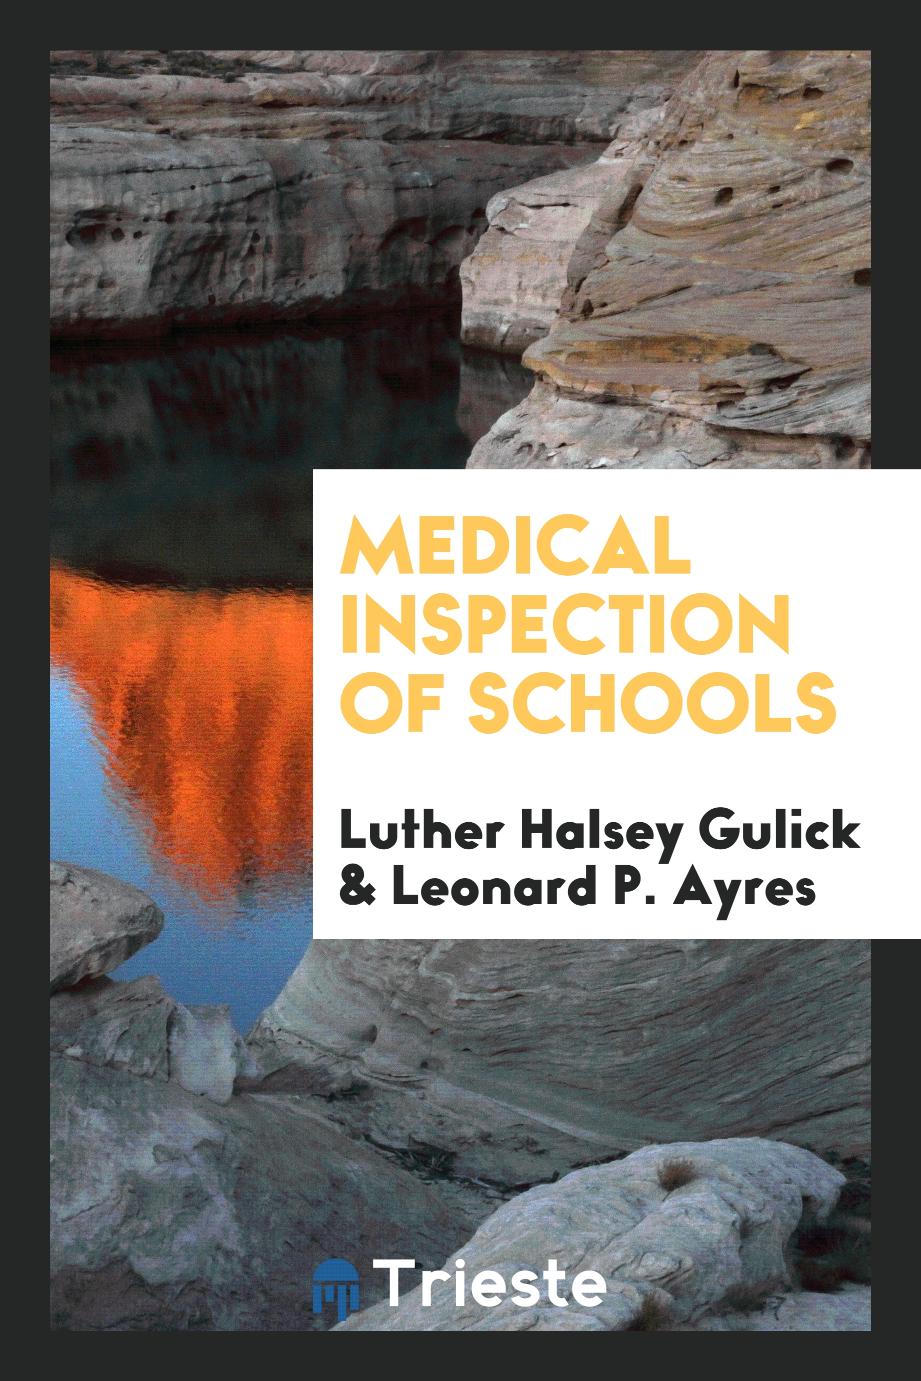 Medical inspection of schools